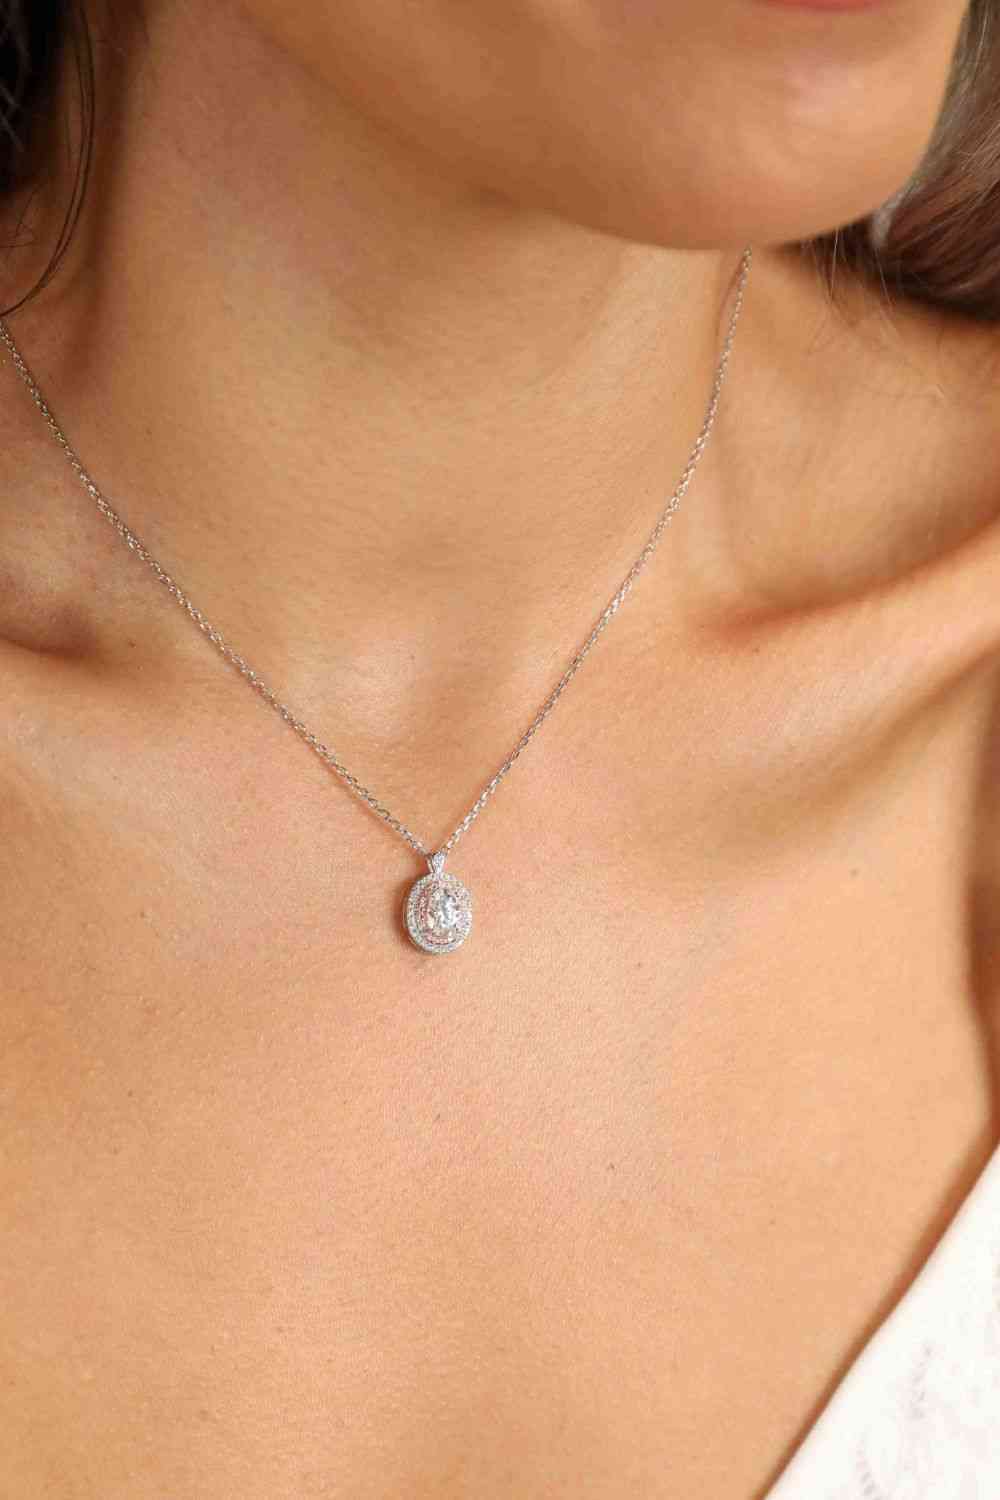 Adored 925 Sterling Silver Rhodium-Plated 1 Carat Moissanite Pendant Necklace Silver One Size